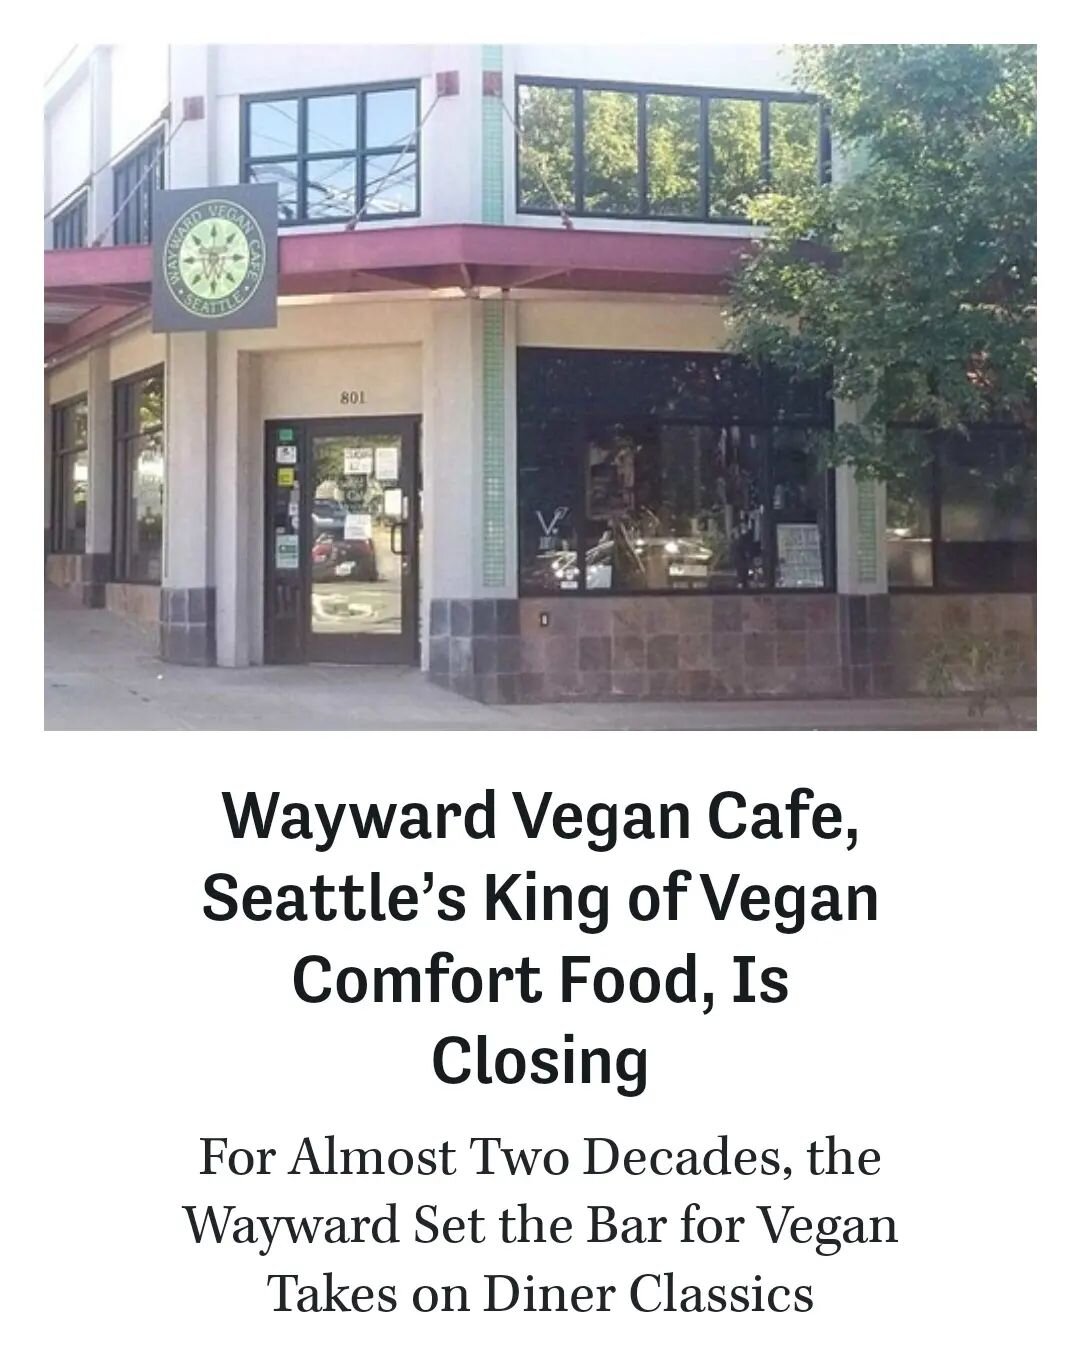 @waywardvegancafe is closing 💔 

I had the privilege of covering the story (and some cool backstories about punk + activist scenes, and vegan spots pre-Wayward) for @thestrangerseattle 

Many thanks to @talon.hippo @darbytrashtattoos @gangofcentaurs